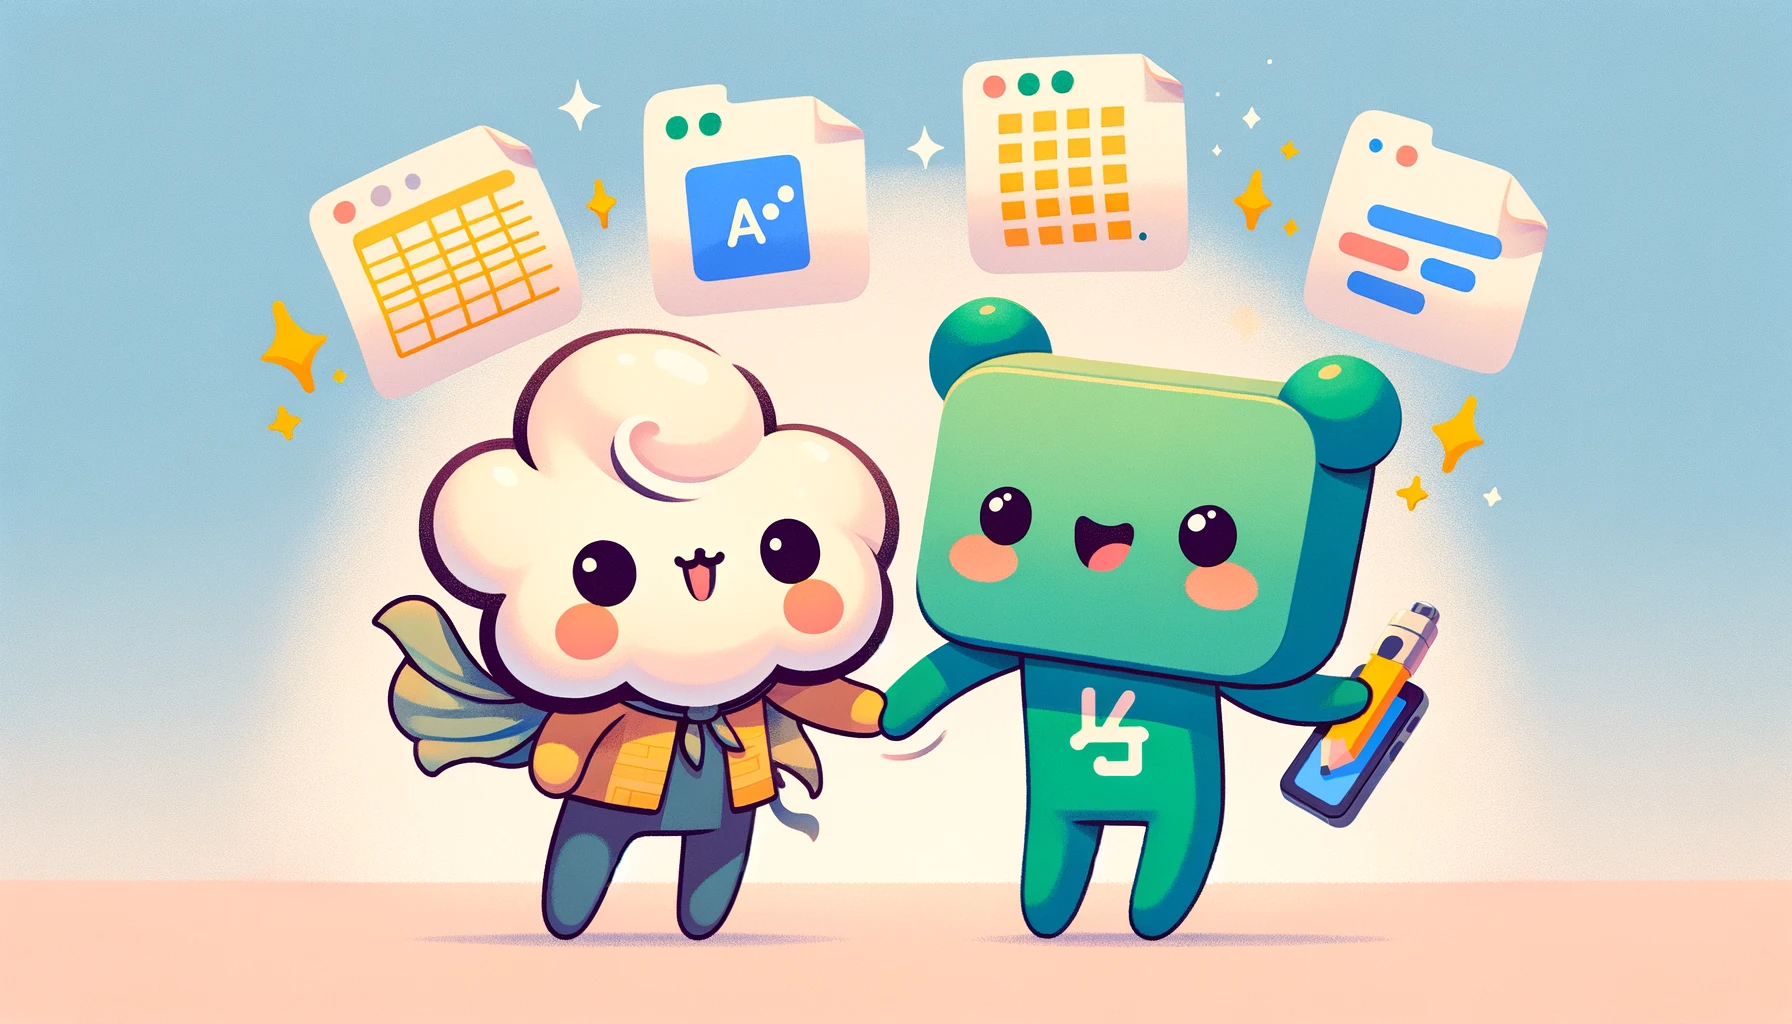 A whimsical and playful illustration in a flat, 2D style, featuring two anthropomorphic characters, 'Spreadsheet-kun' and 'Apps Script-kun', holding hands. 'Spreadsheet-kun' is represented as a cheerful character with elements of a spreadsheet, while 'Apps Script-kun' is depicted as a lively character with features symbolizing coding and script elements. The background is simple and pastel-colored, emphasizing the friendly and cooperative relationship between the two characters. This image is suitable for a blog post about web app development using Google Apps Script and spreadsheets, in a 16:9 aspect ratio. 